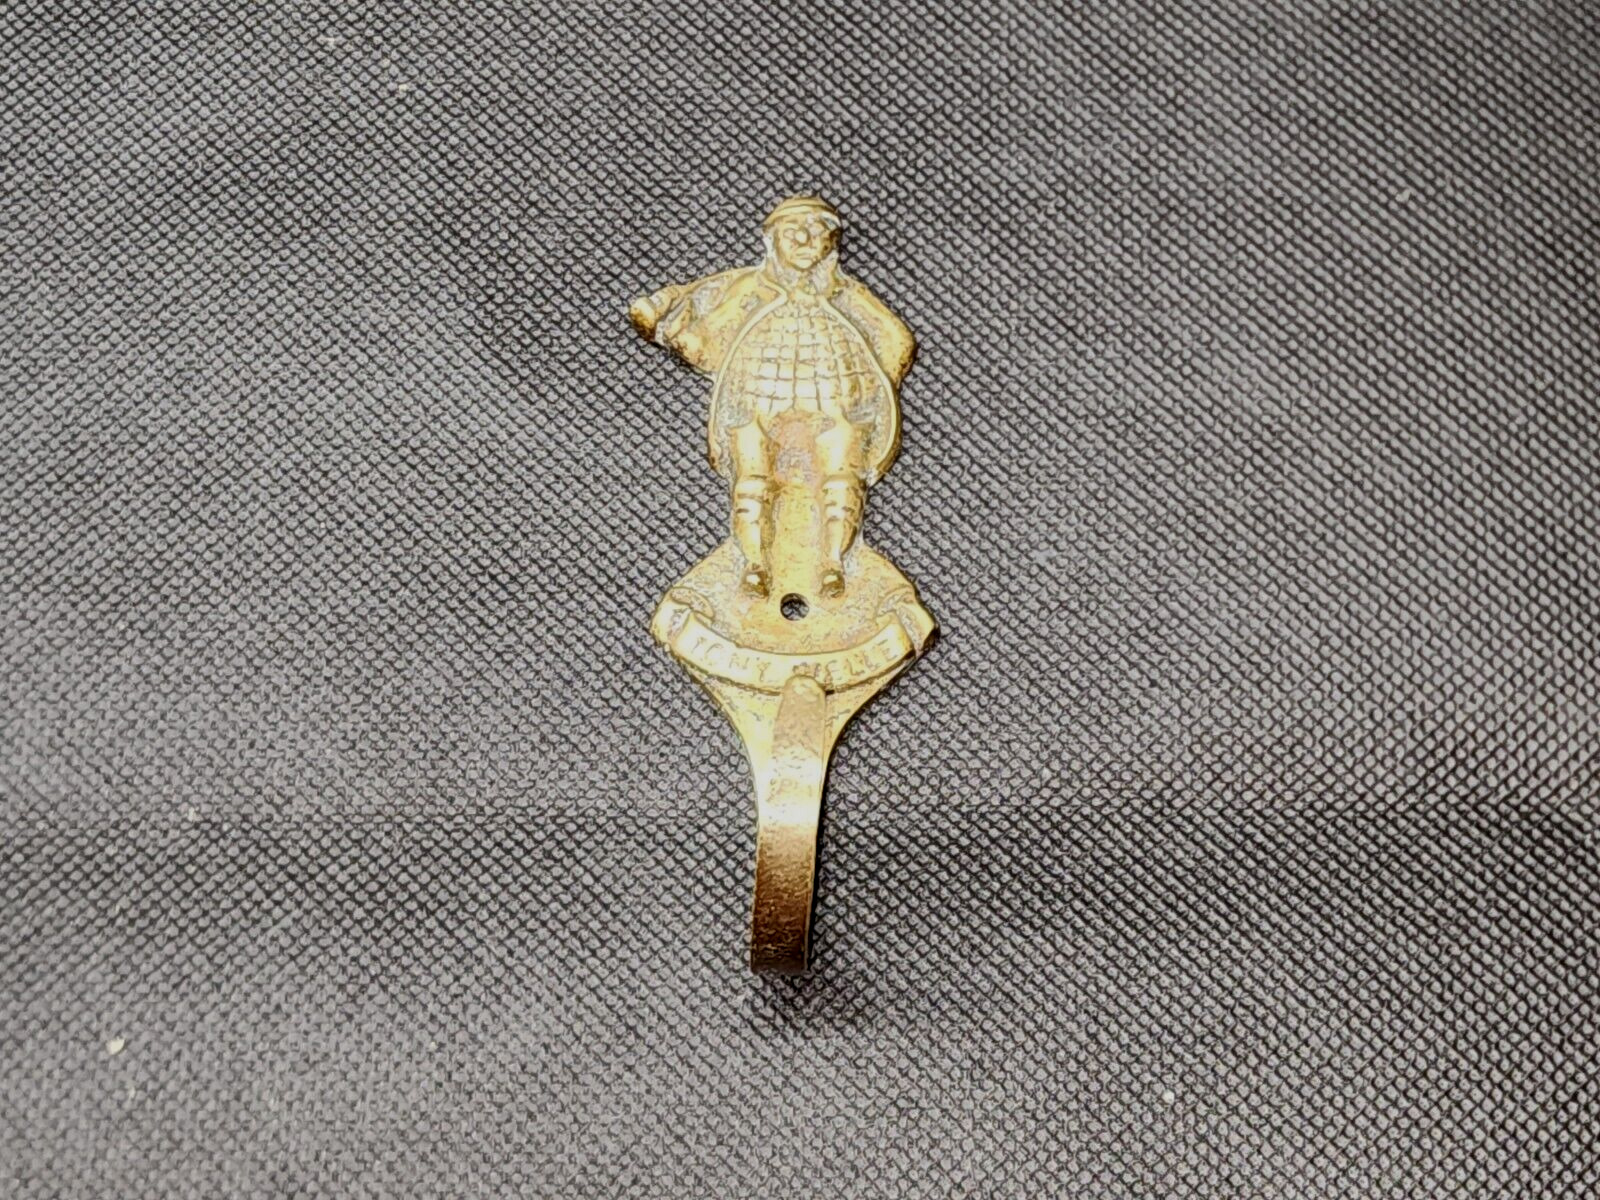 Vintage SOLID BRASS Wall Hook TONY WELLER, Dickens Character #4521 - England